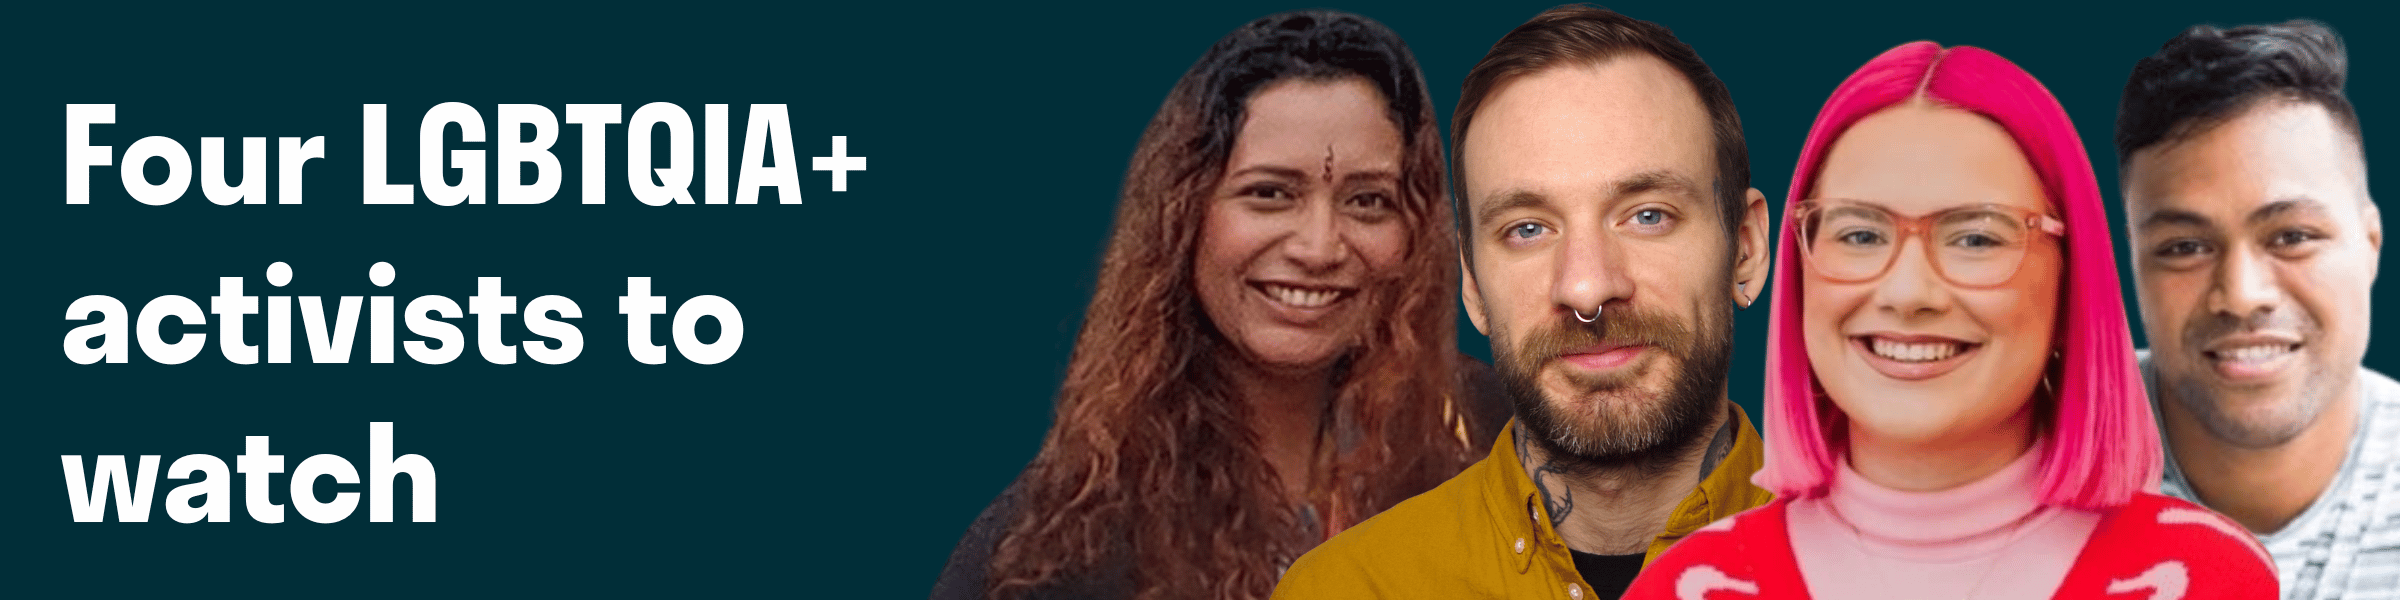 Web banner for Four LGBTQIA Activists Changing the World. On the right are headshots of Nandini Tanya Lallmonis, Stewart O'Callaghan, Bethany Moore, and Mathew Siliga Amituanai. On the left white writing reads: "Four LGBTQIA+ activists to watch."